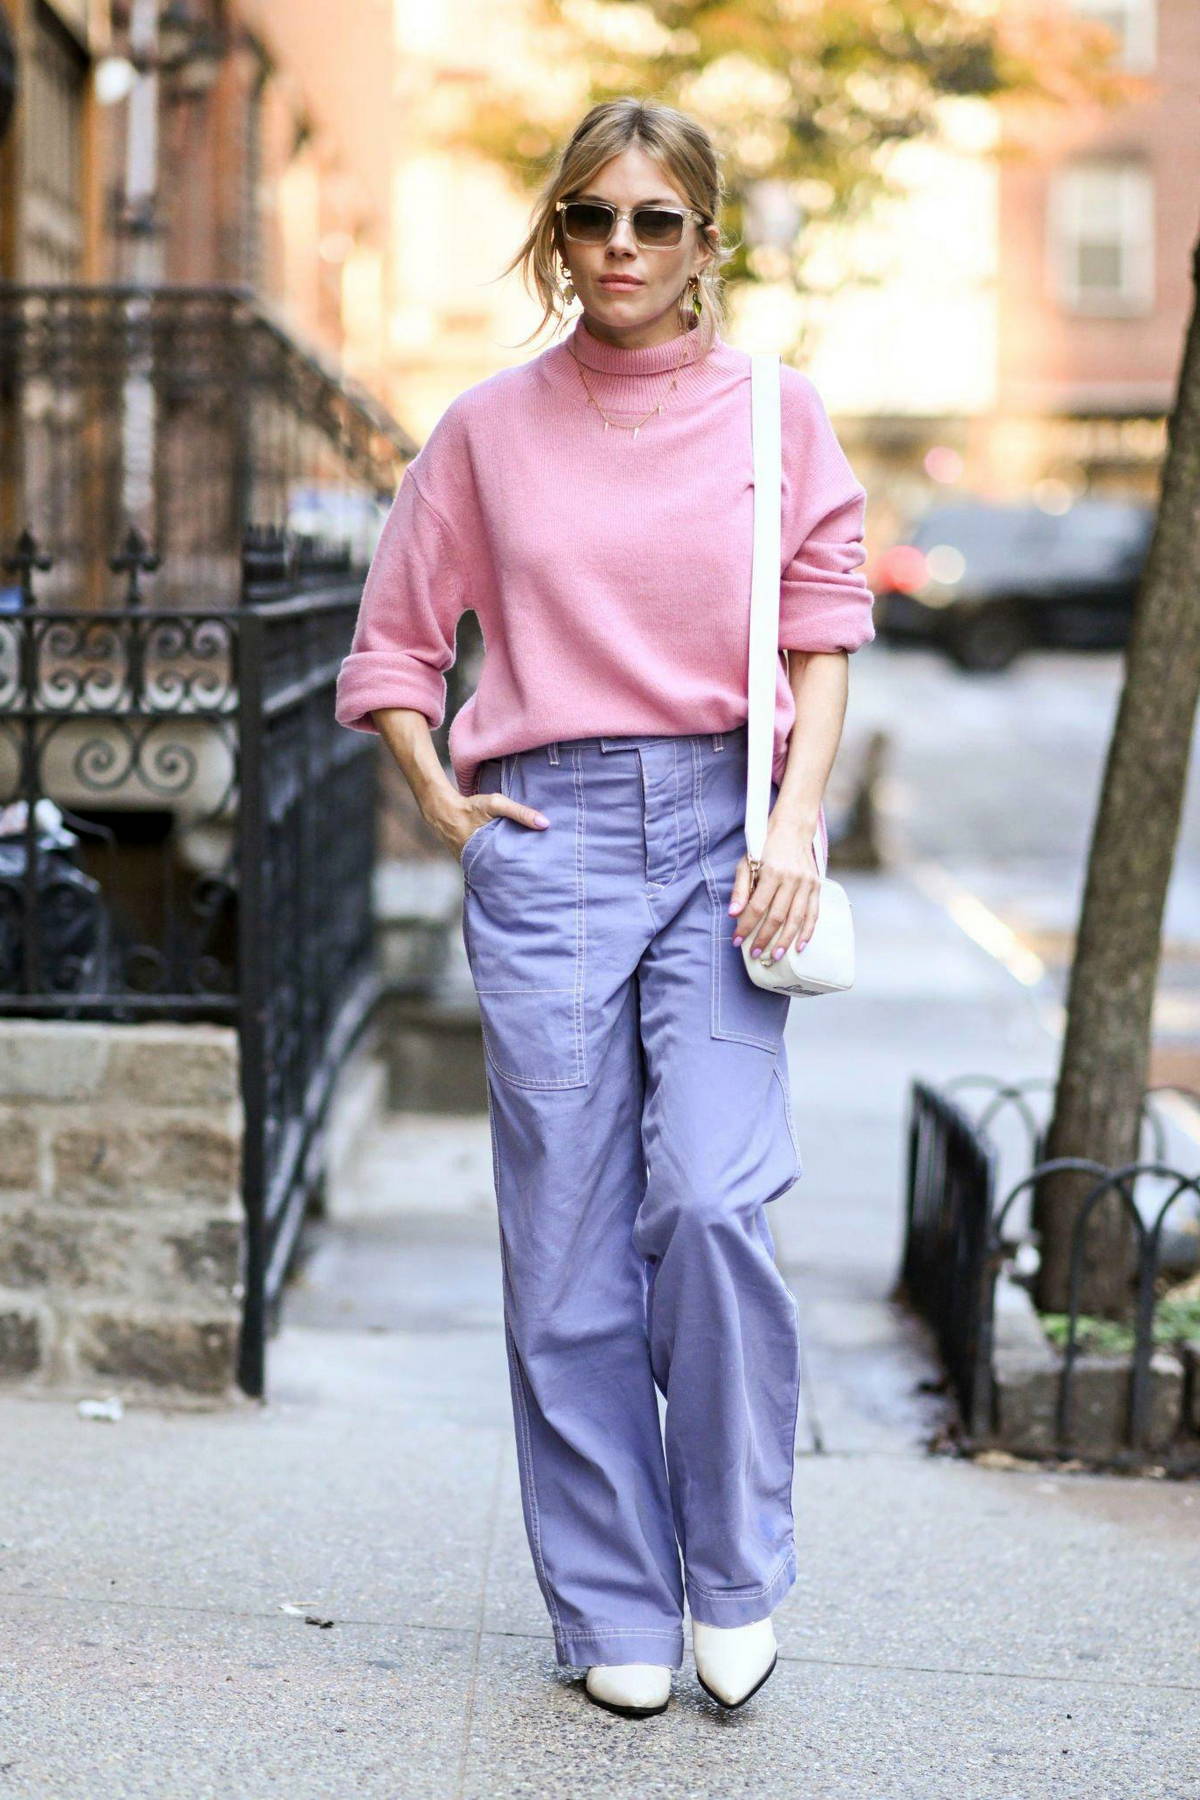 Sienna Miller looks pleasant in a pink sweater and lavender pants while out  running errands in